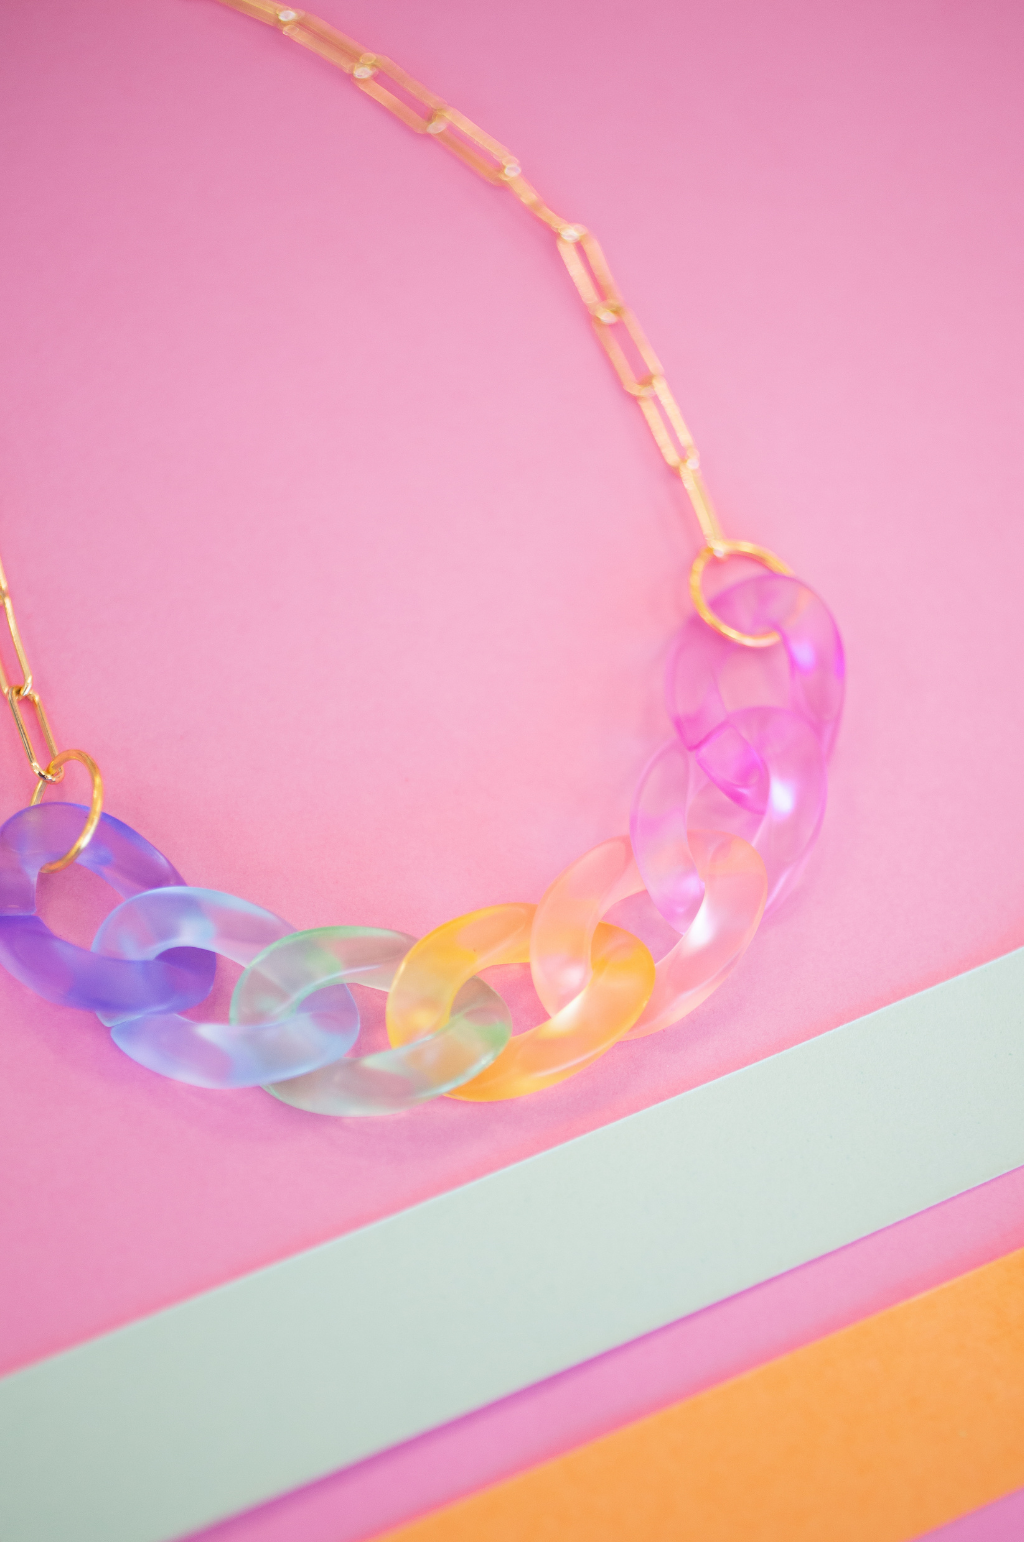 Over the Rainbow 'Gracie' Necklace by Annie Claire Designs - SoSis